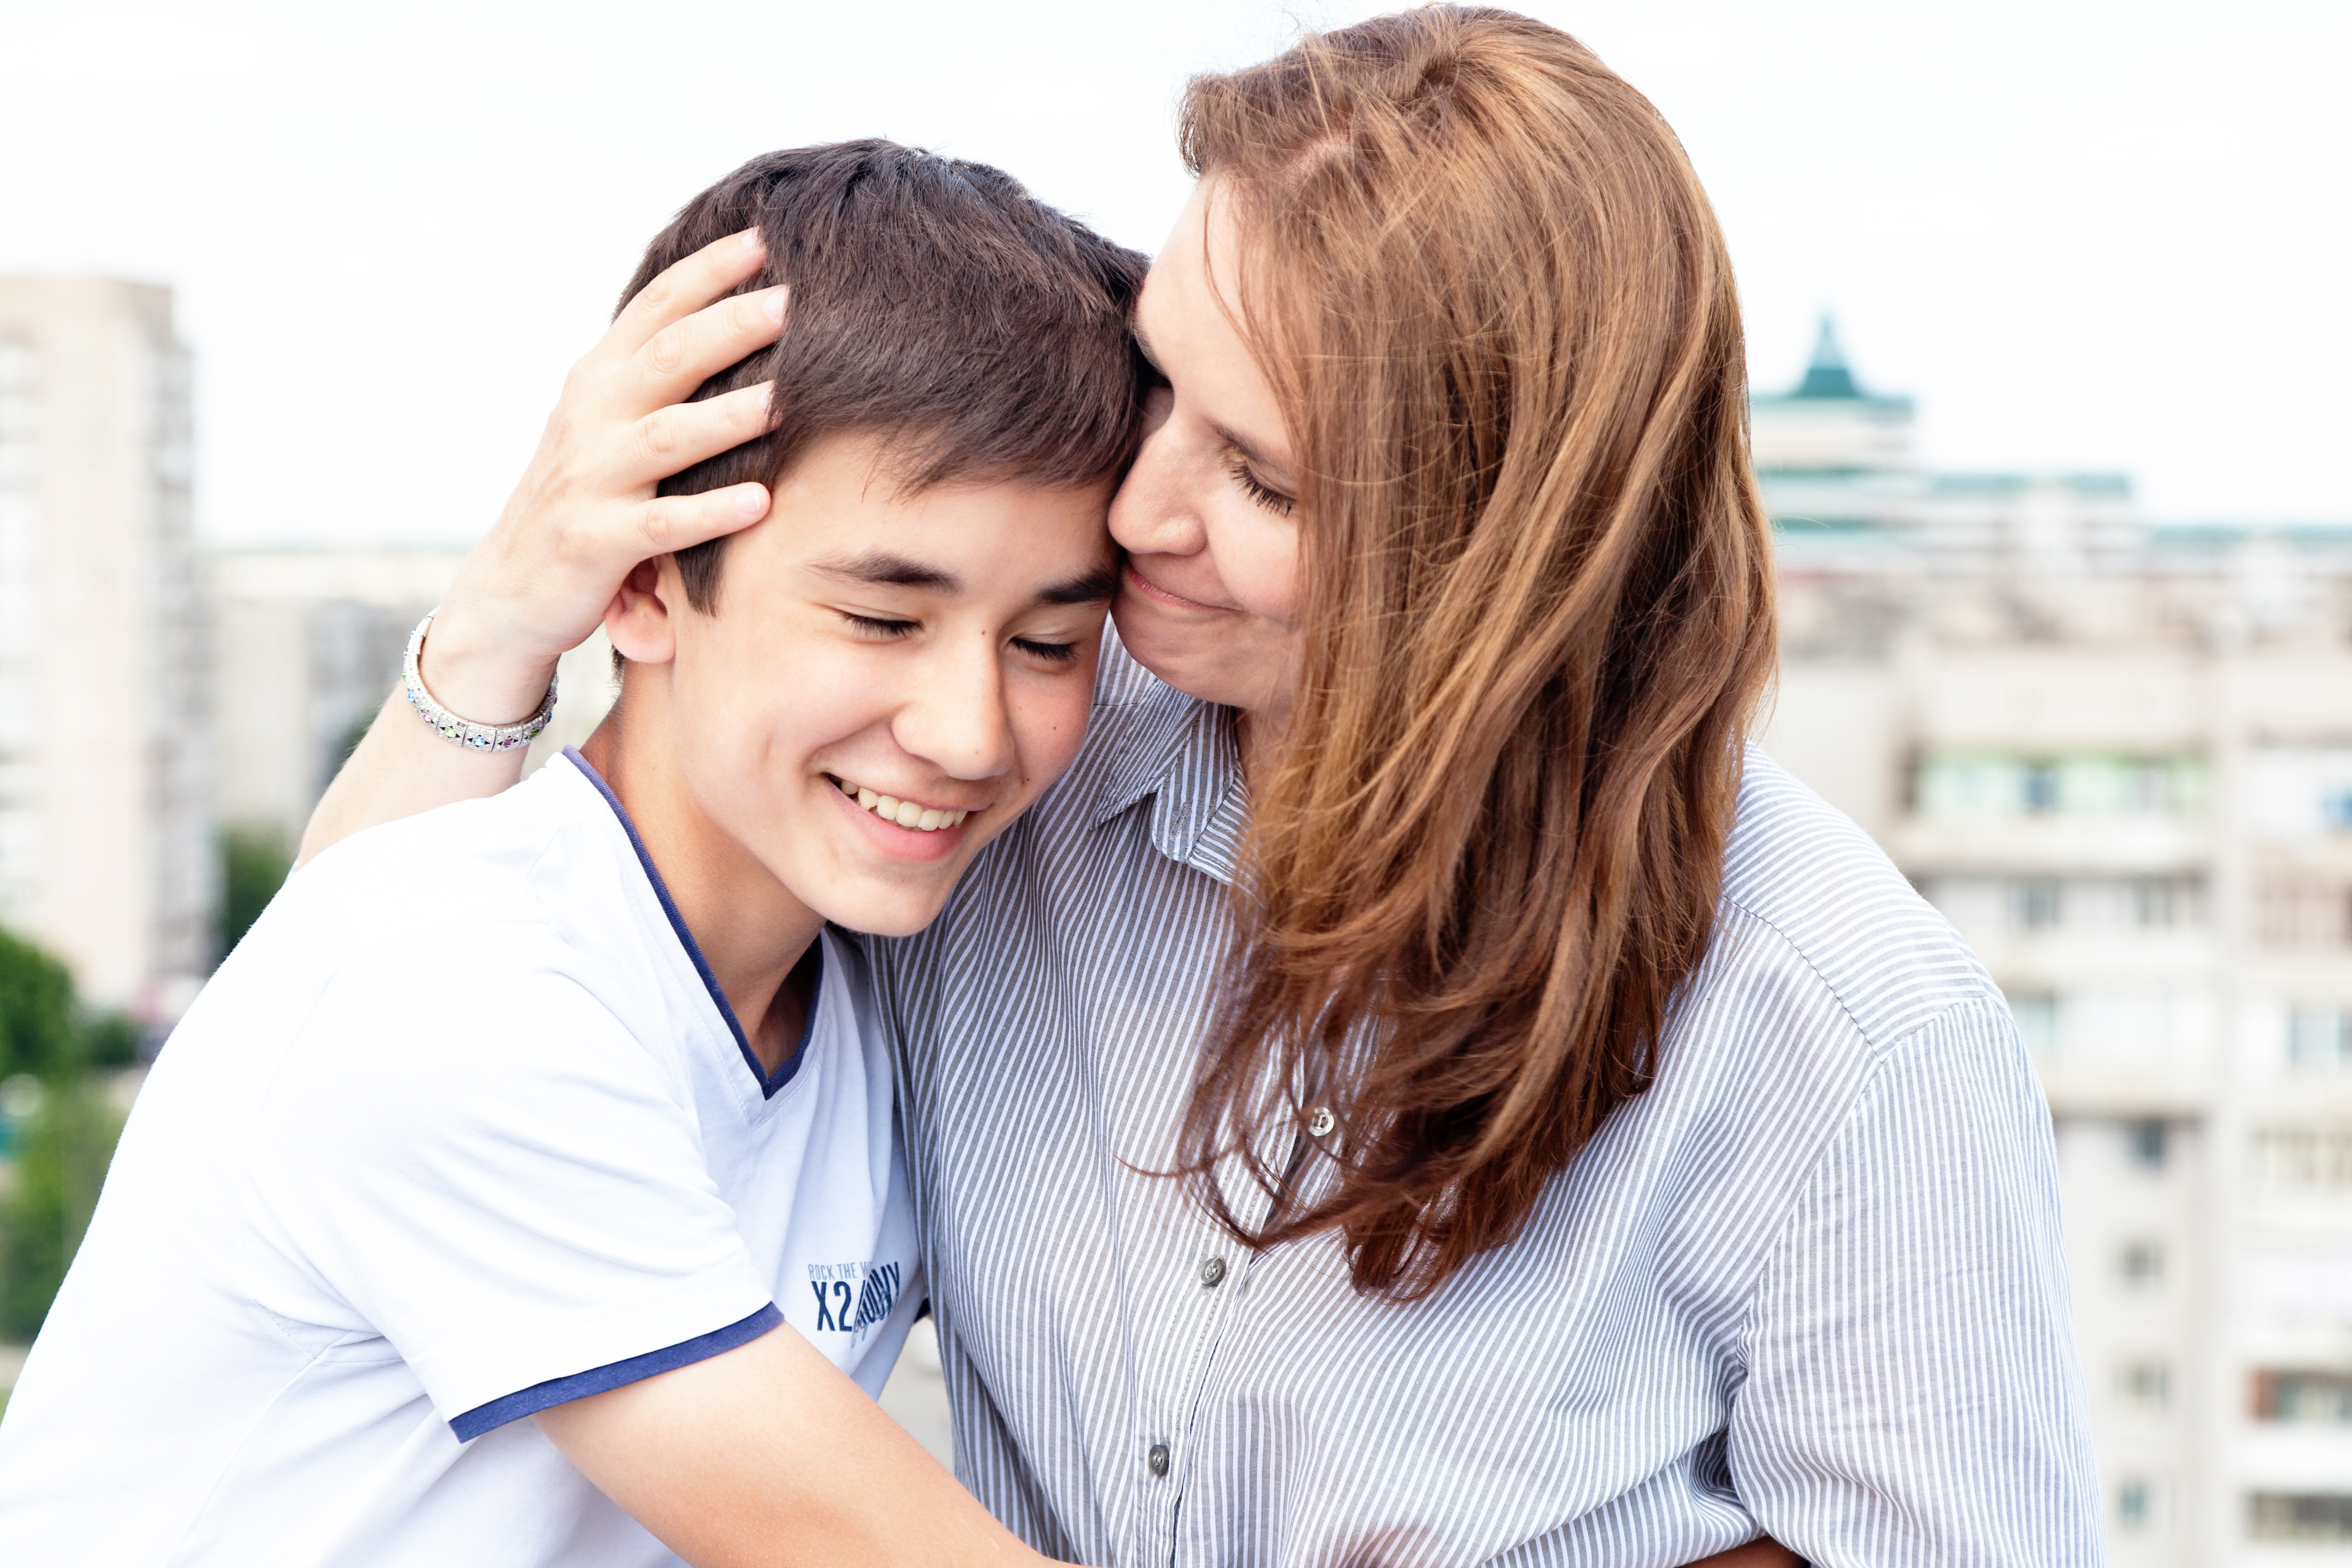 A mother hugging her teenage son | Source: Shutterstock